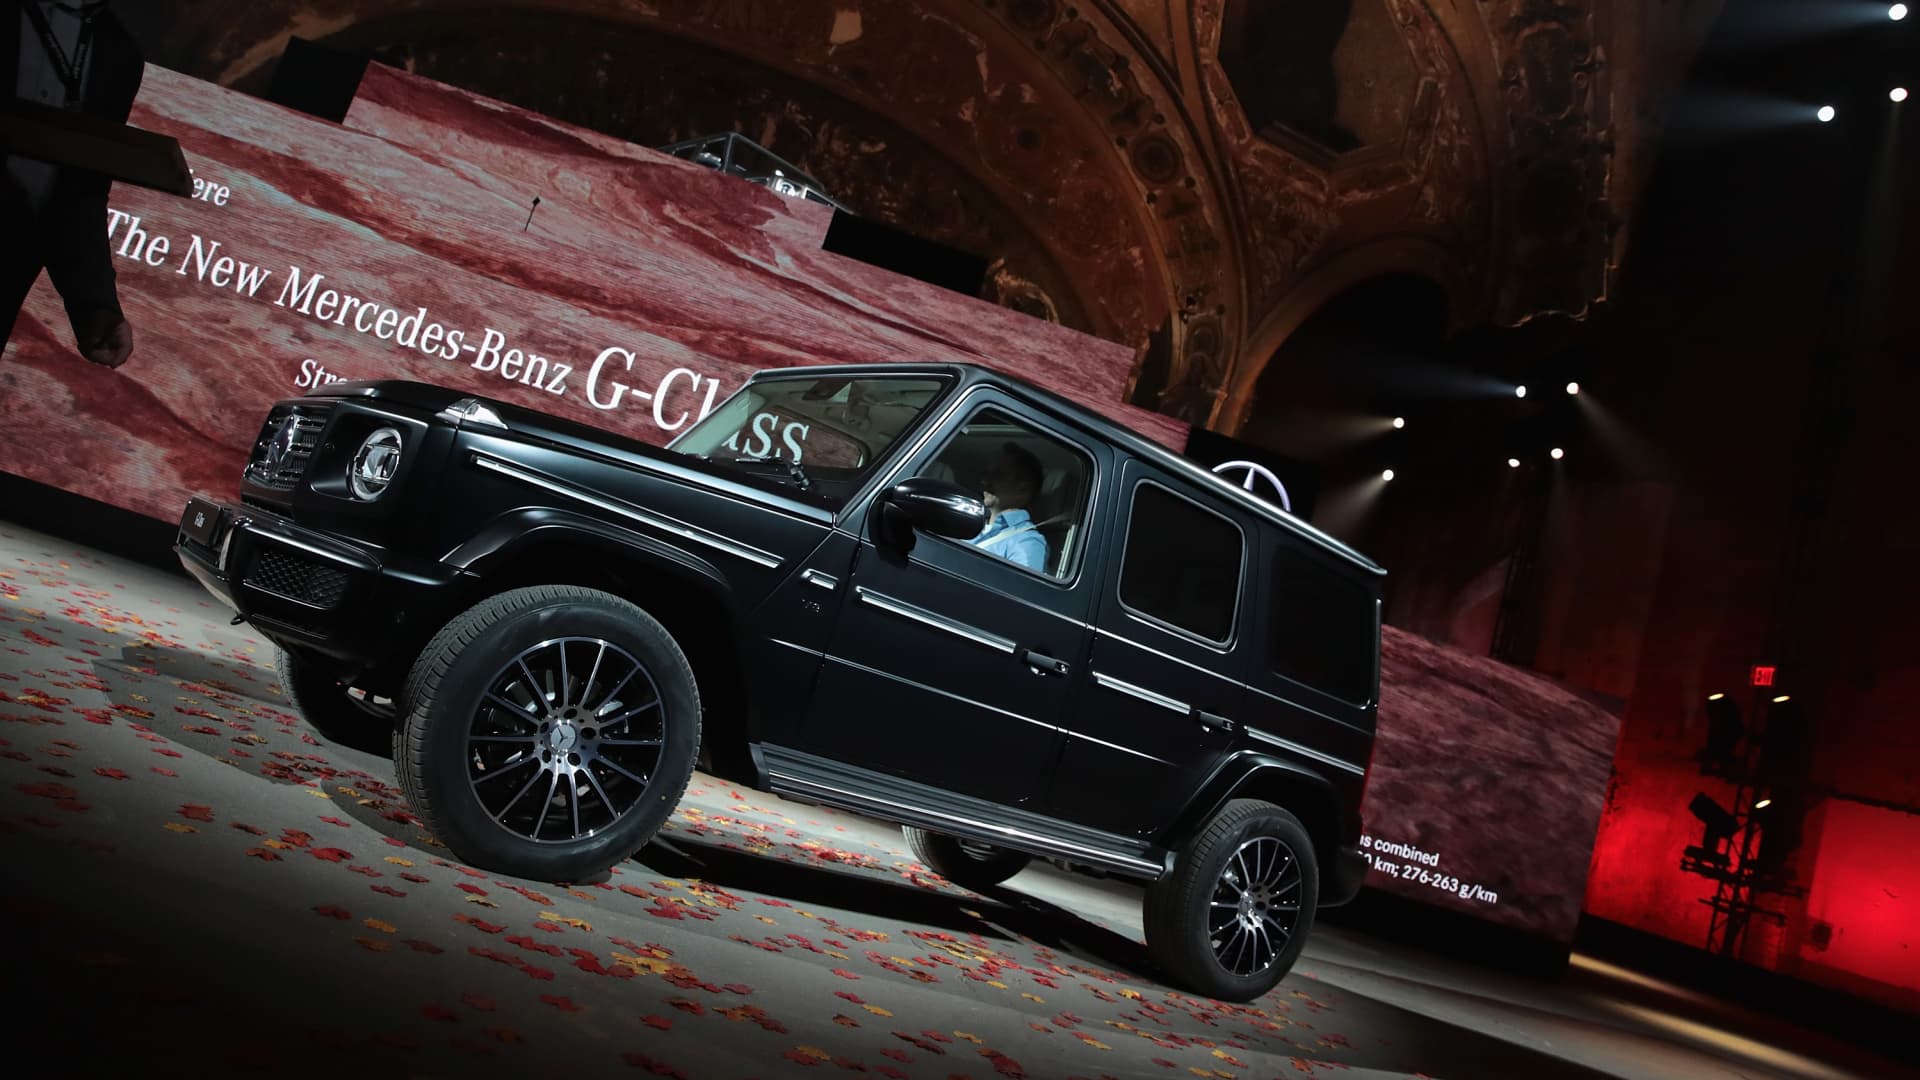 Mercedes to liberate a smaller version of its G Class luxurious SUV